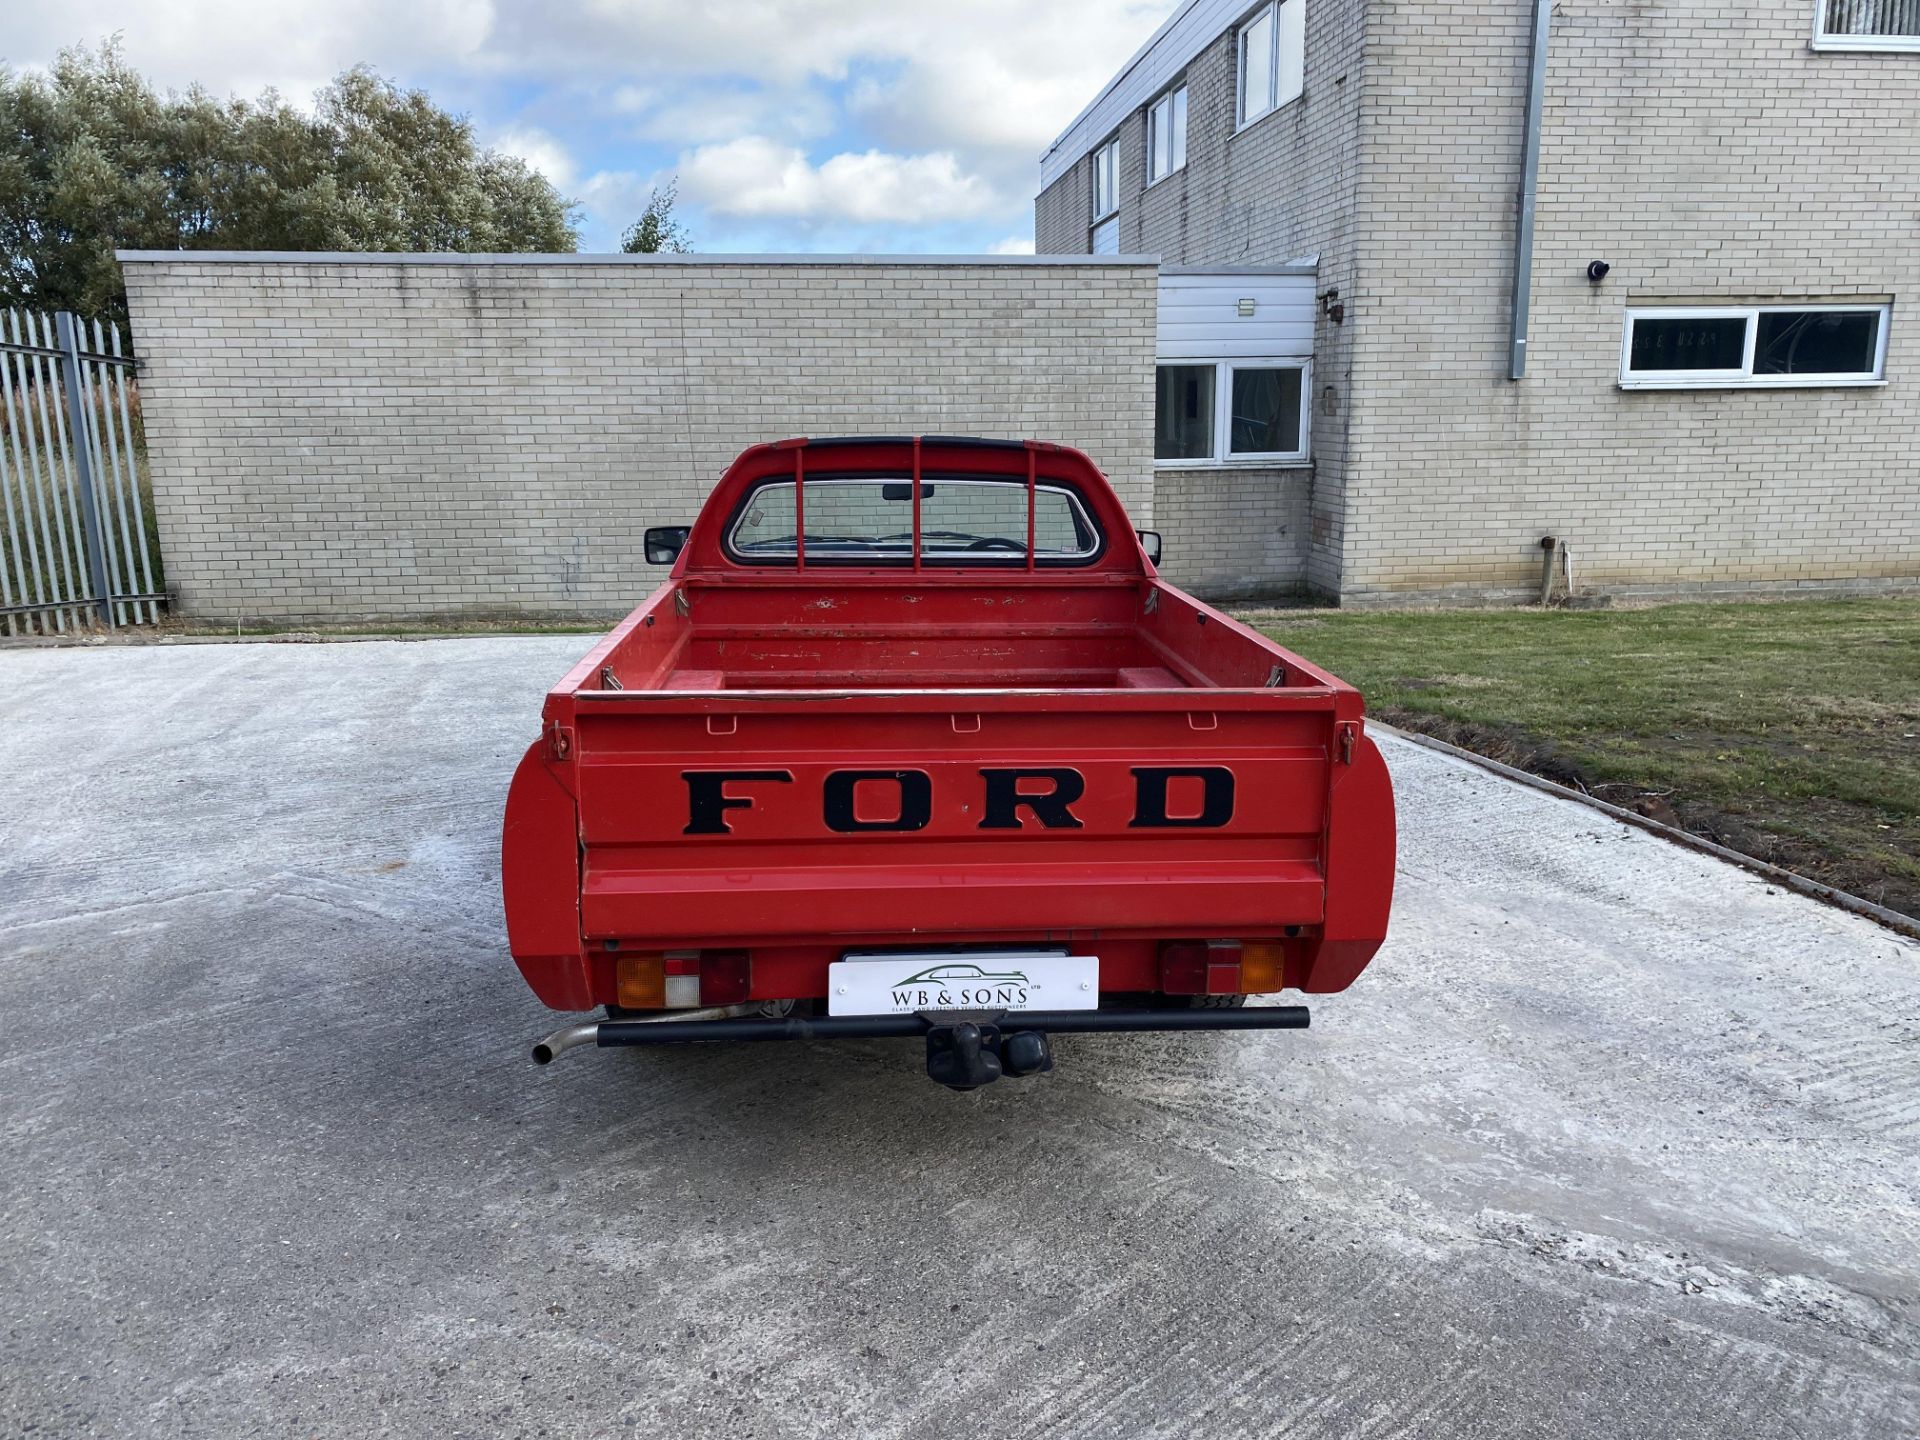 Ford P100 - Image 6 of 37